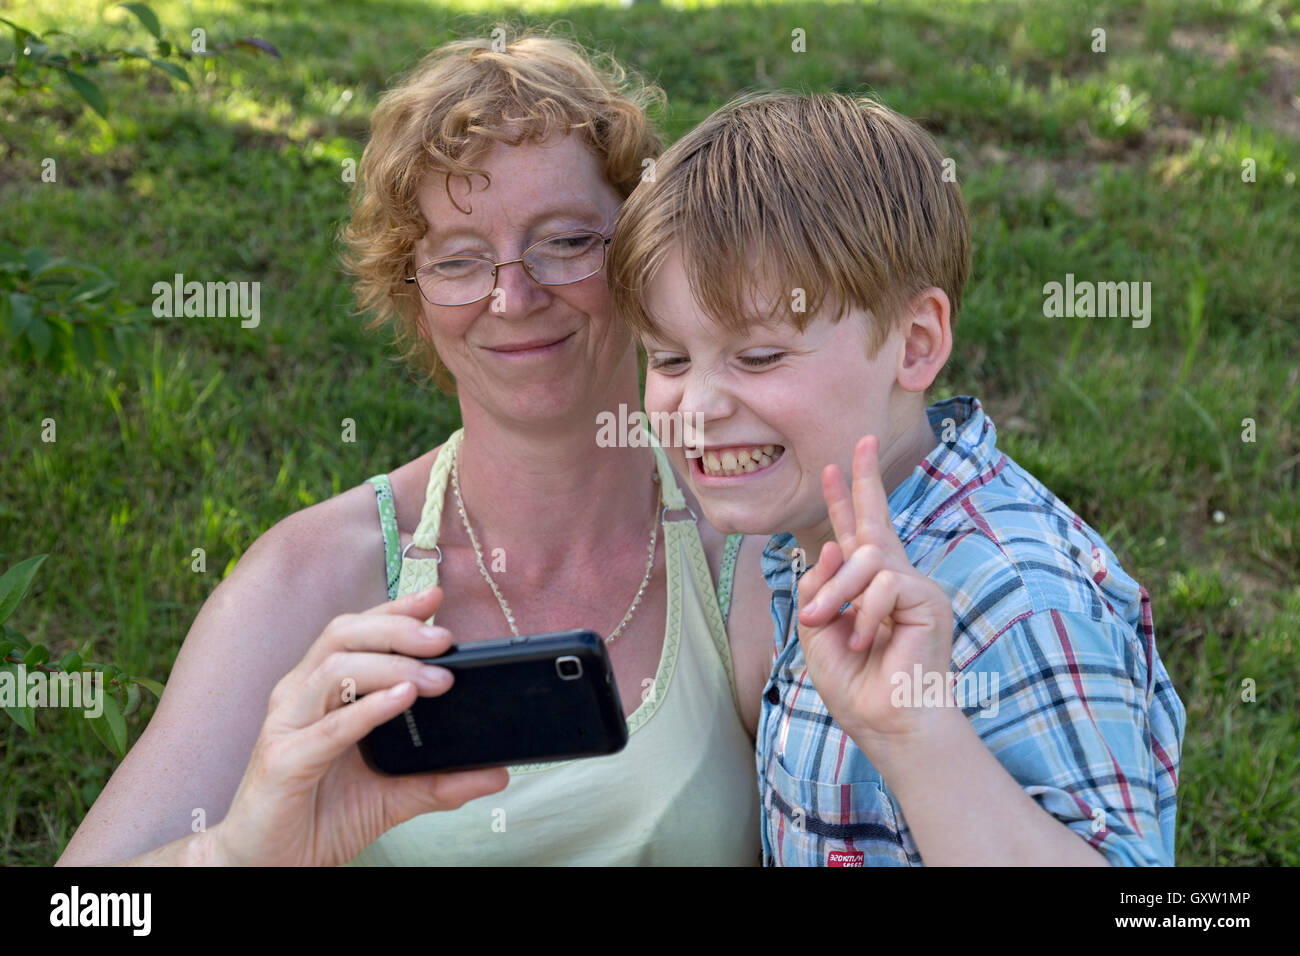 mother and son taking a picture of themselves Stock Photo